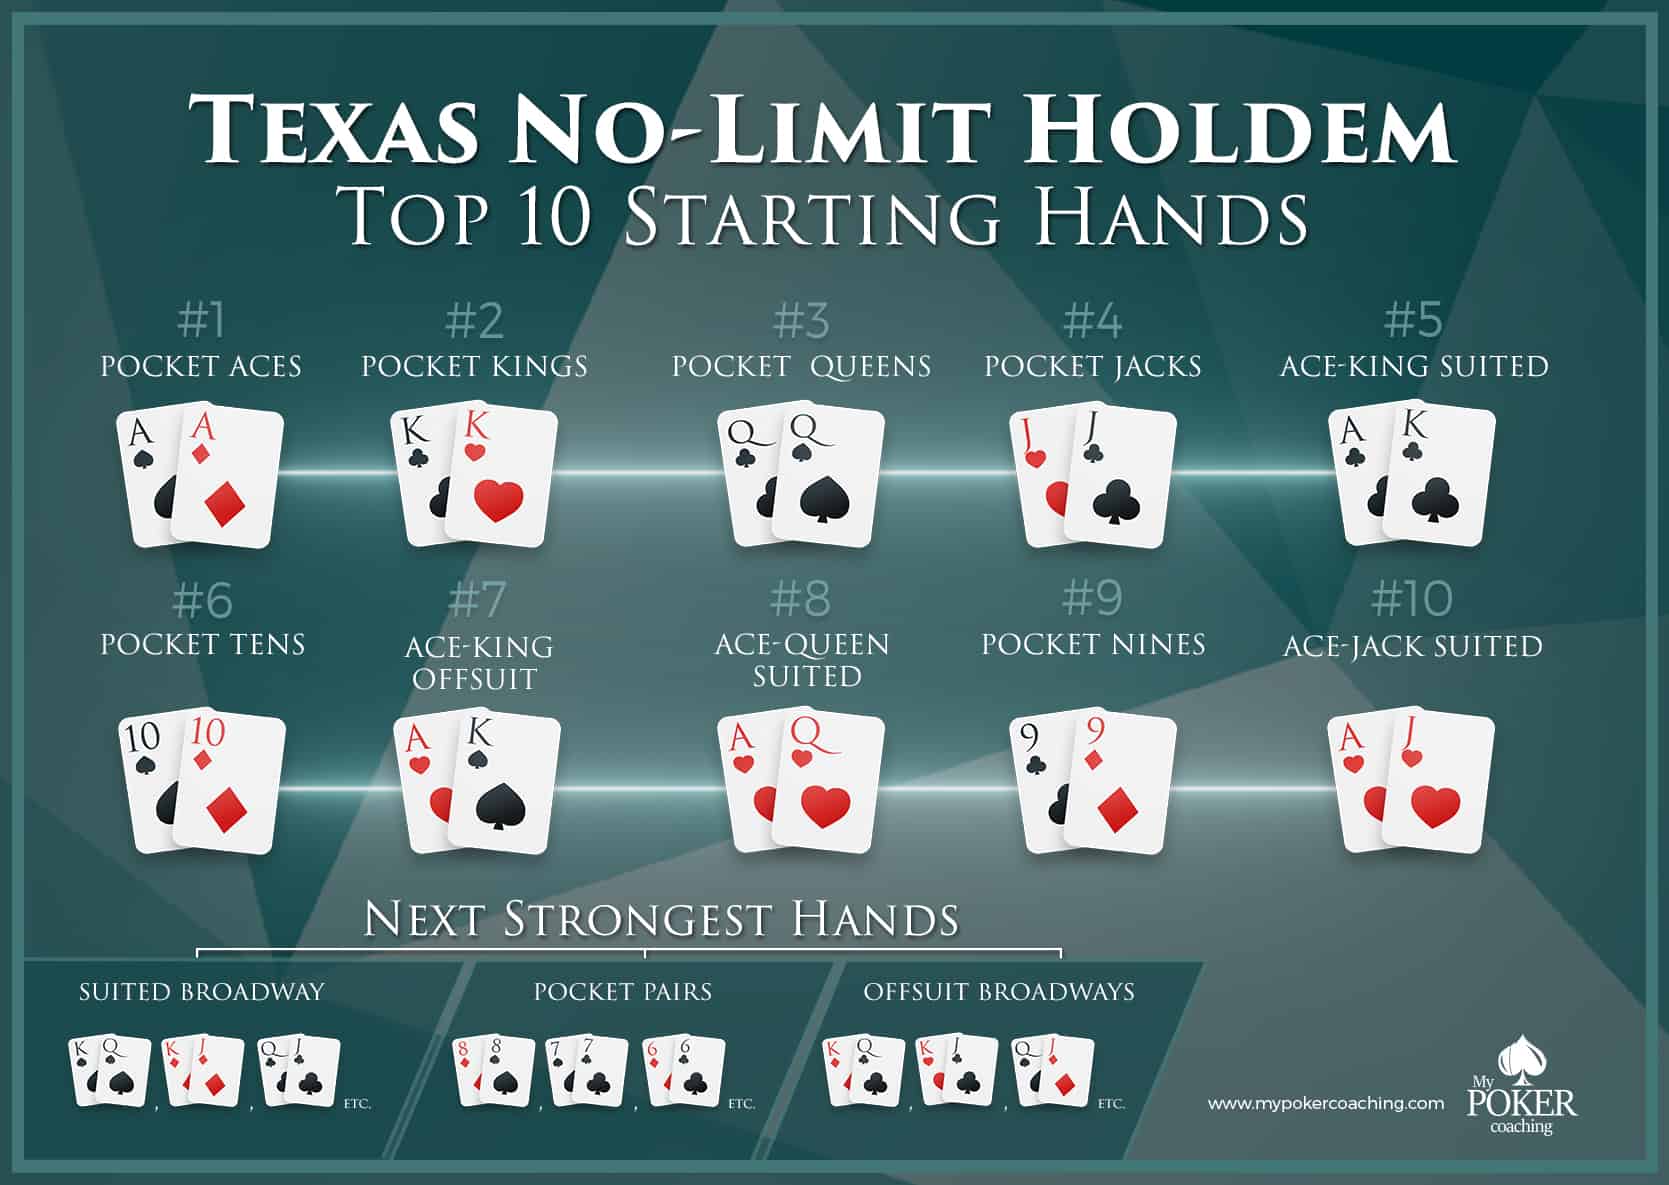 How much money do you start with in Texas HoldEm?